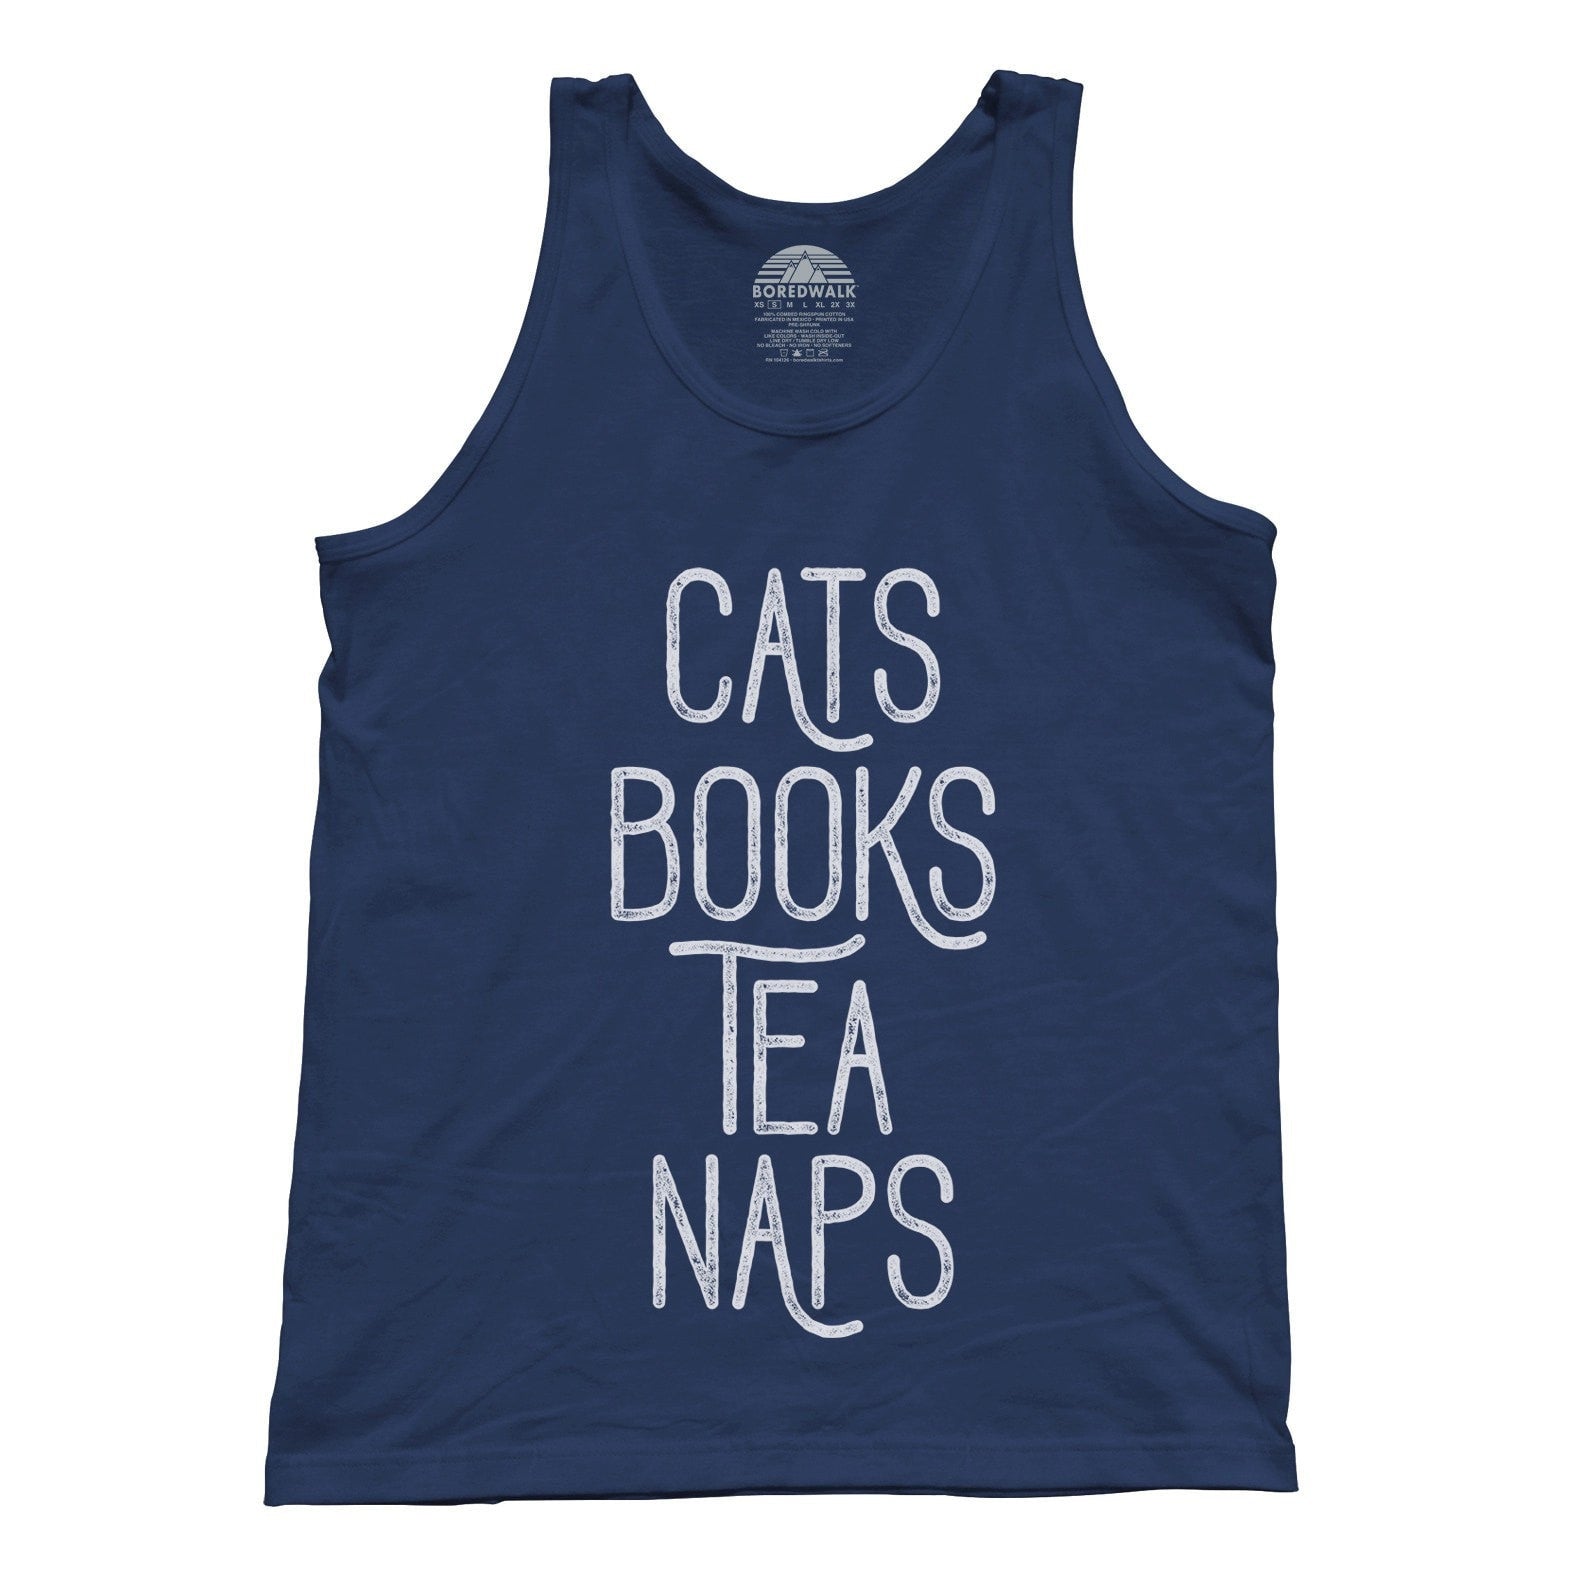 Women's Support Your Local Library Racerback Tank Top - Boredwalk